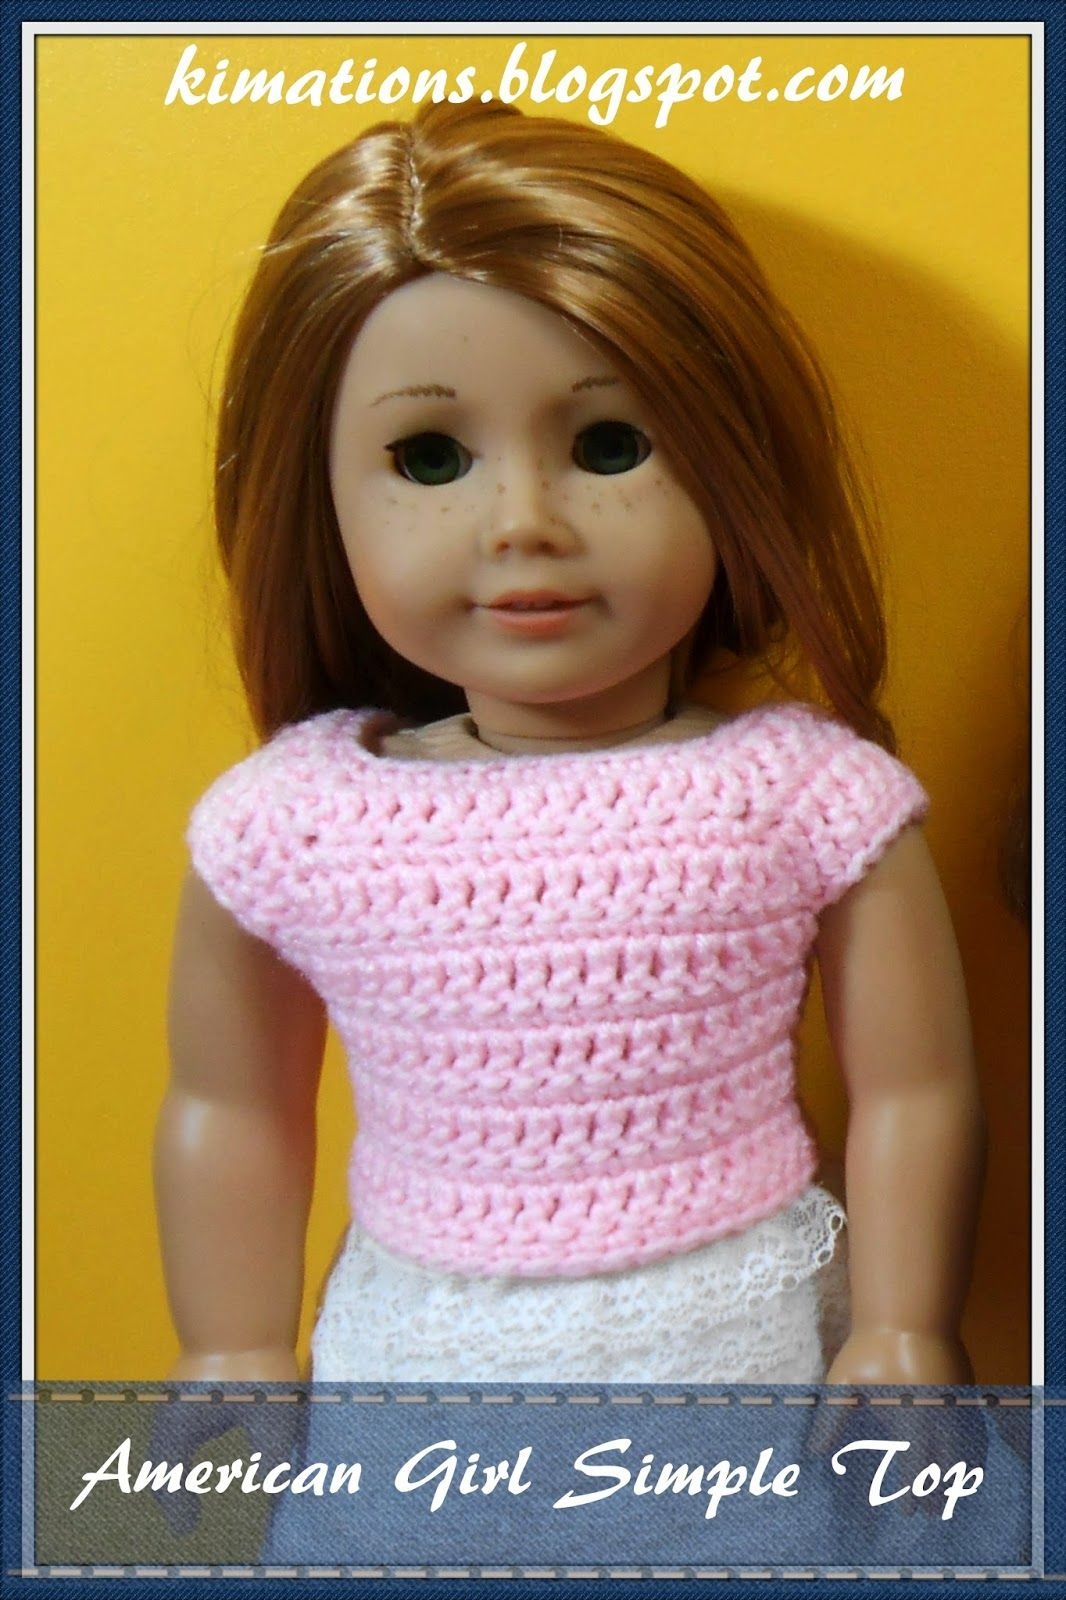 Free Crochet Pattern For 18 Inch Doll. Kimations: American Girl - Free Printable Crochet Doll Clothes Patterns For 18 Inch Dolls